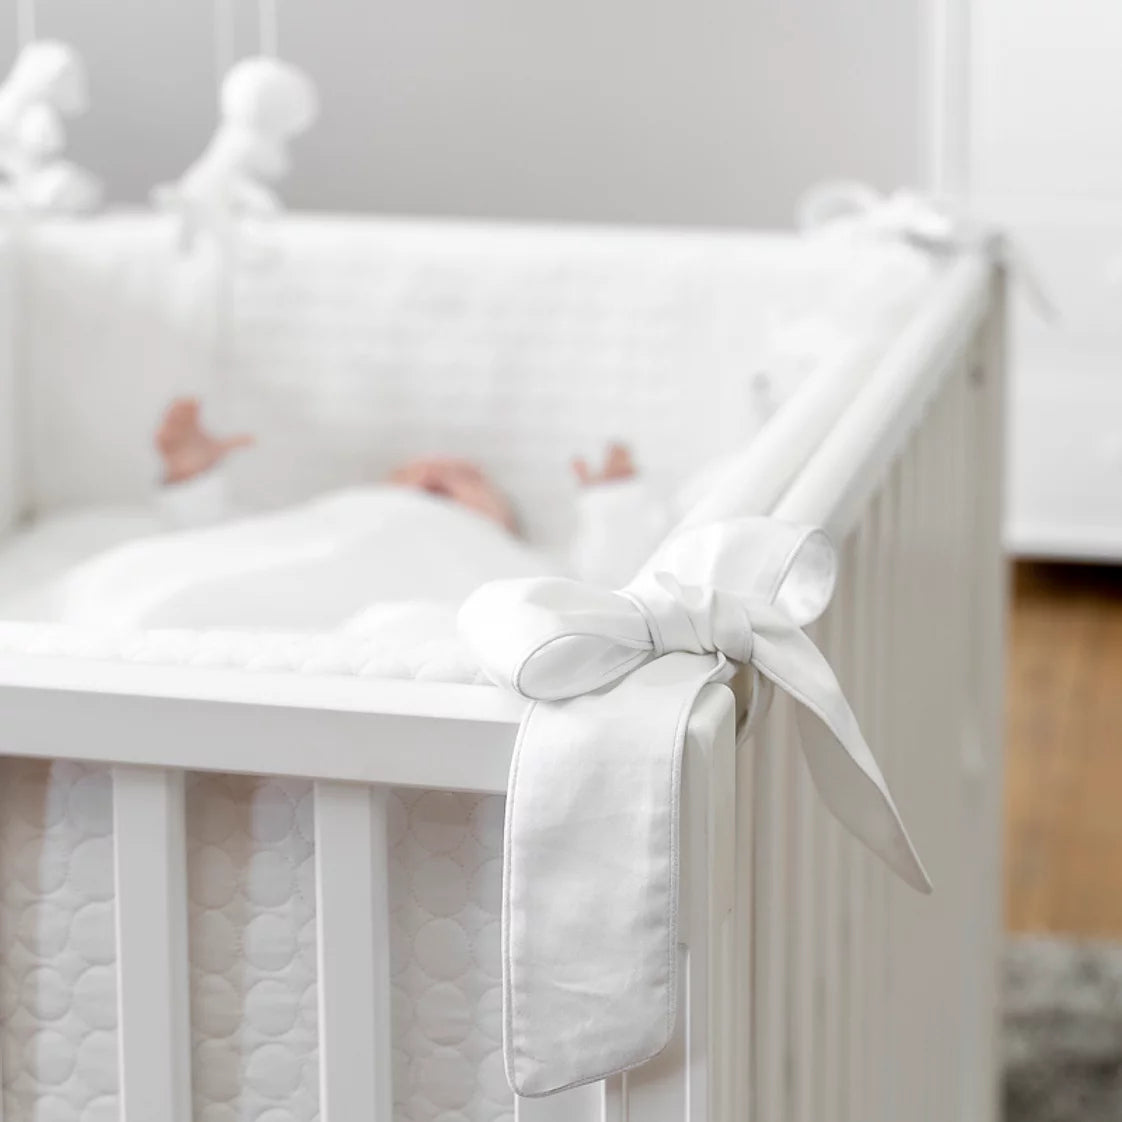 First Furniture Cot / Playpen